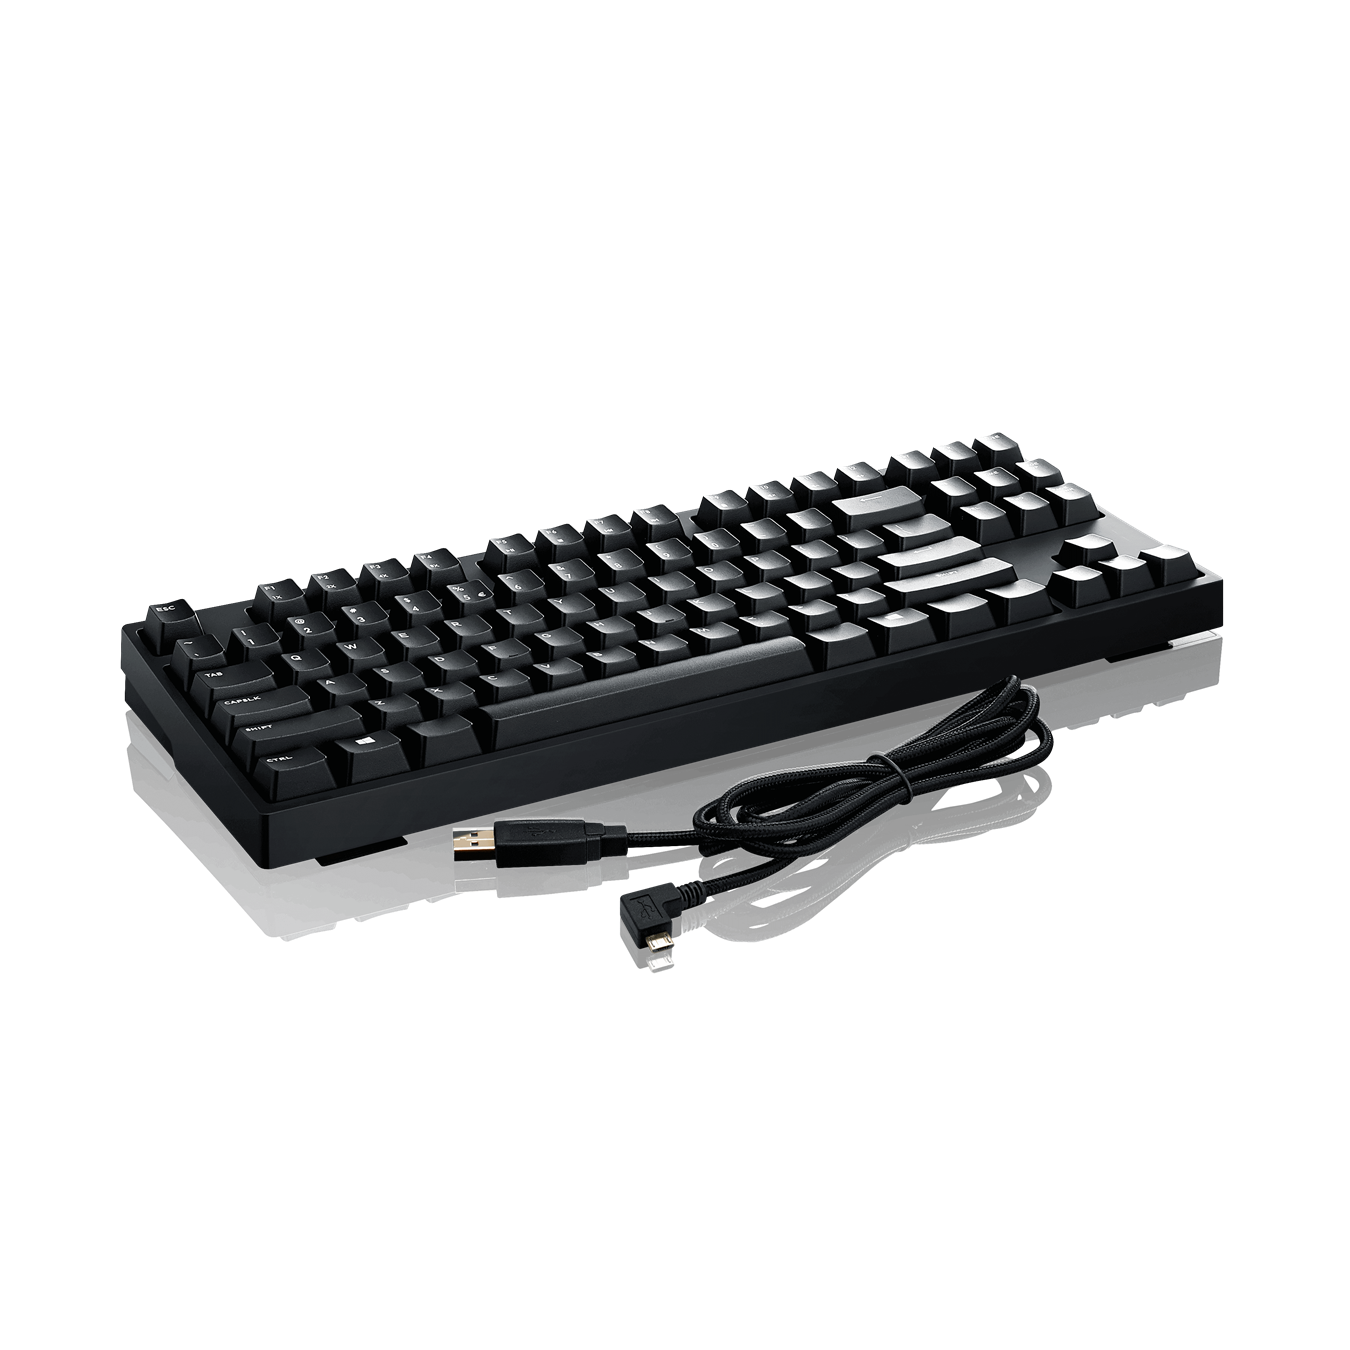 Compatible with CHERRY MX Keycaps